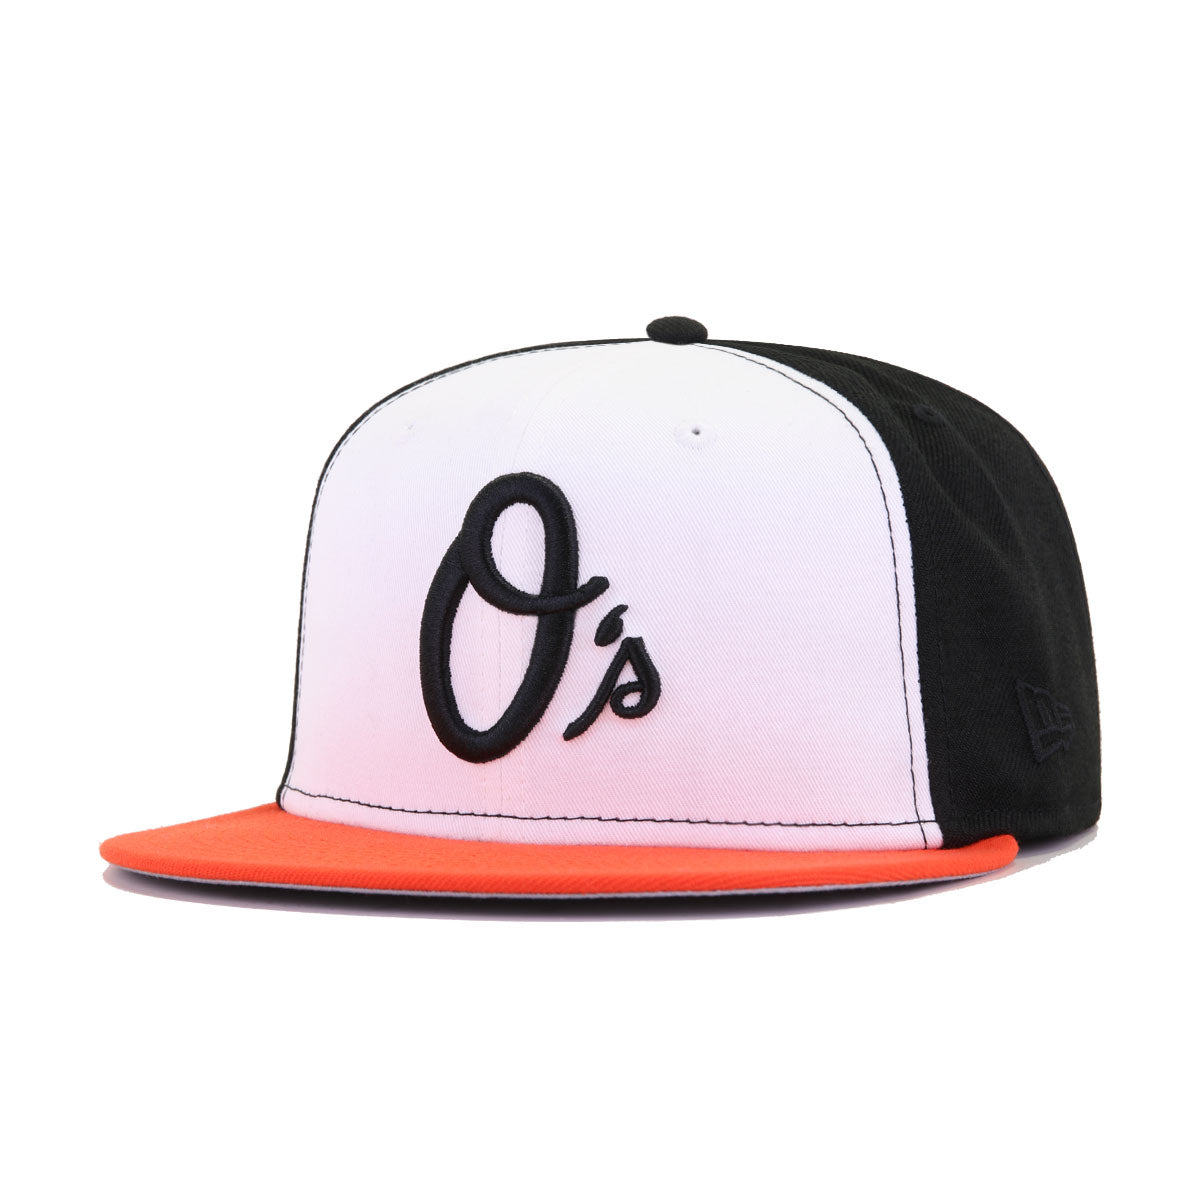 baltimore orioles hat black and white